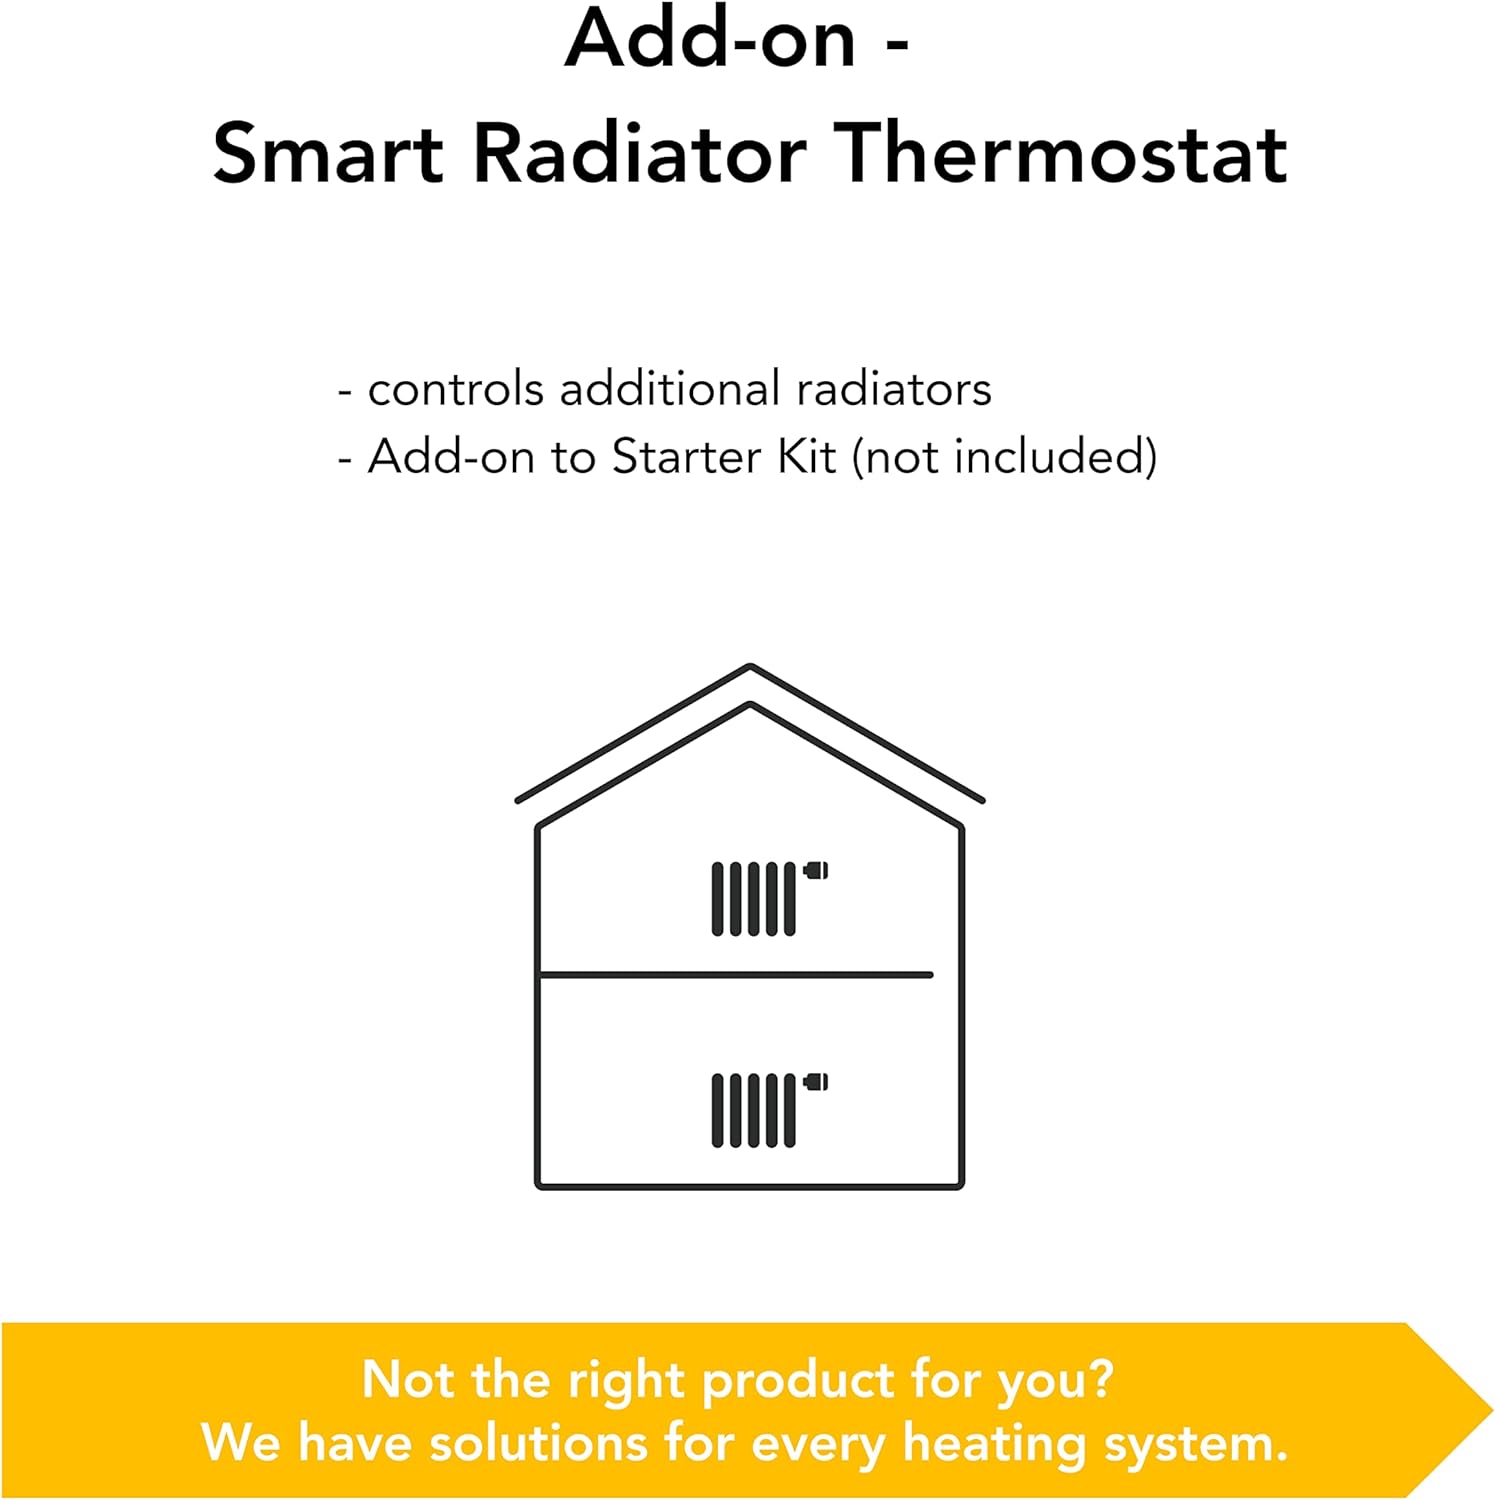 tado° Smart Radiator Thermostat - Wifi Add - On Smart Radiator Valve For Digital Multi - Room Control, Easy Installation, Save Heating Costs - Works With Alexa, Siri, And Google Assistant - Amazing Gadgets Outlet